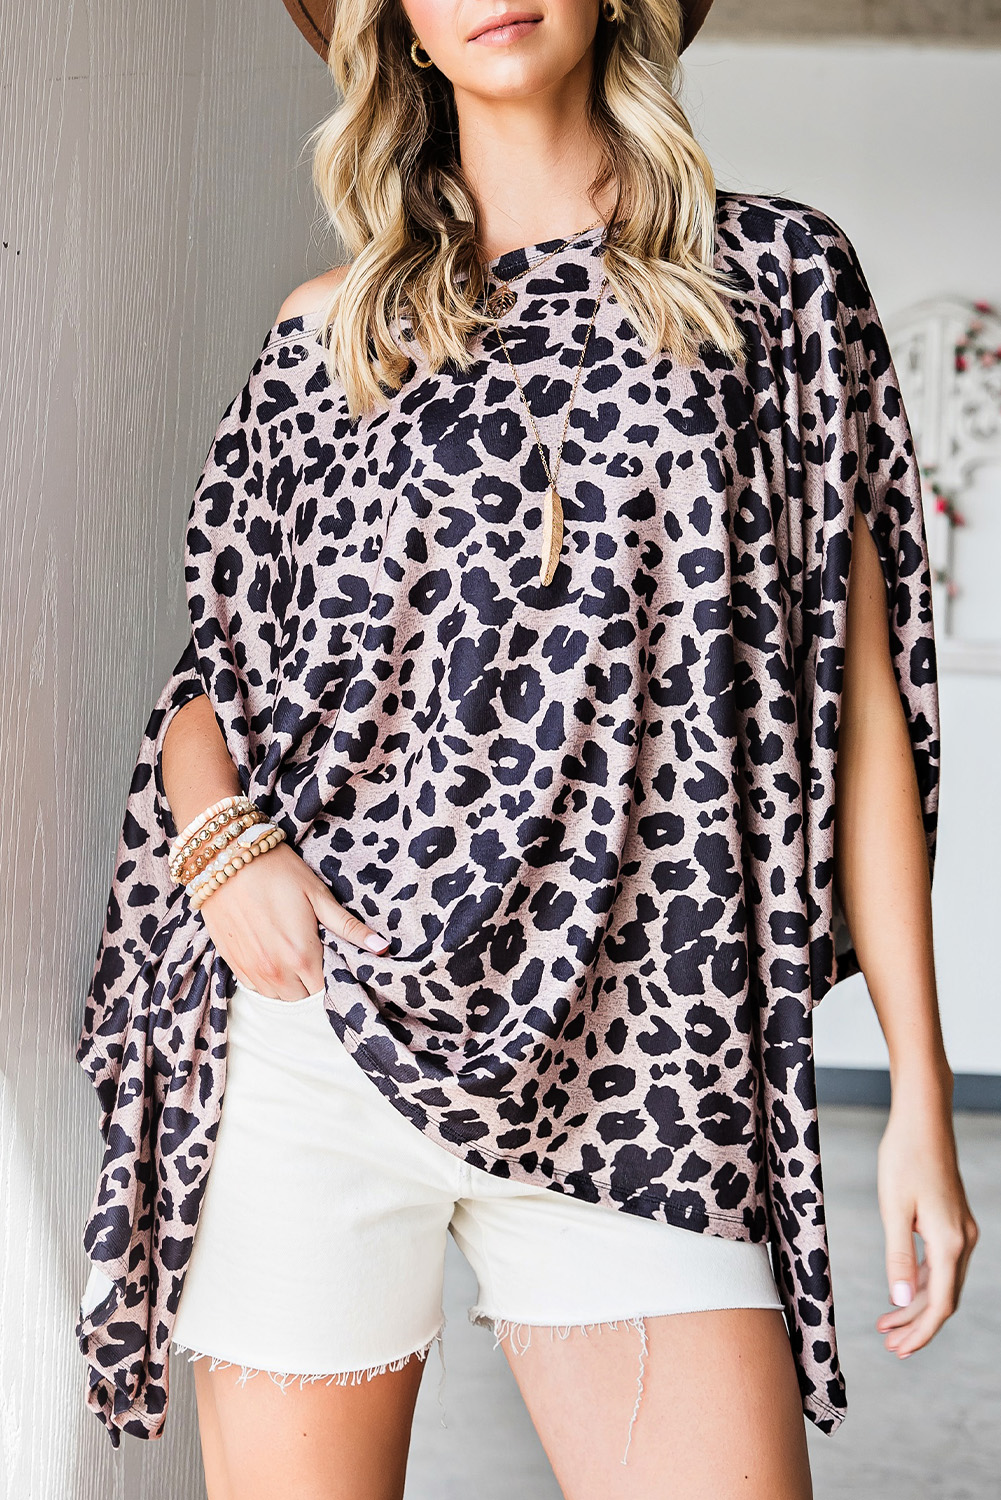 Shewin Wholesale Cheetah PONCHO Style Casual Oversized Tunic Top